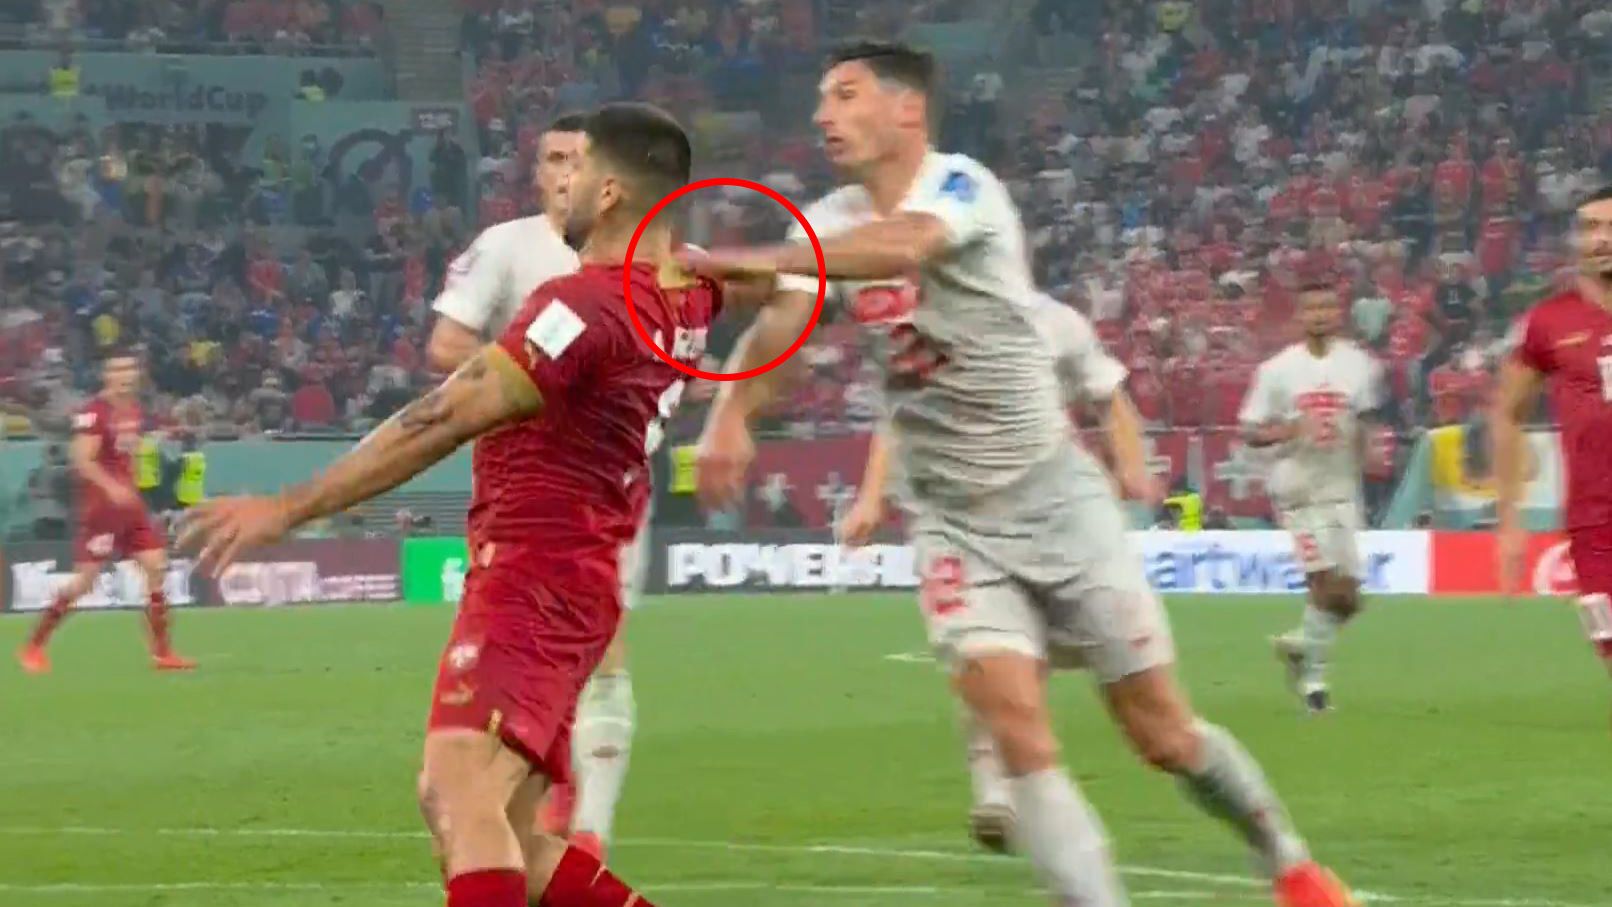 Serbian striker Aleksandar Mitrović appealed for a penalty after this contact against Switzerland at the World Cup.